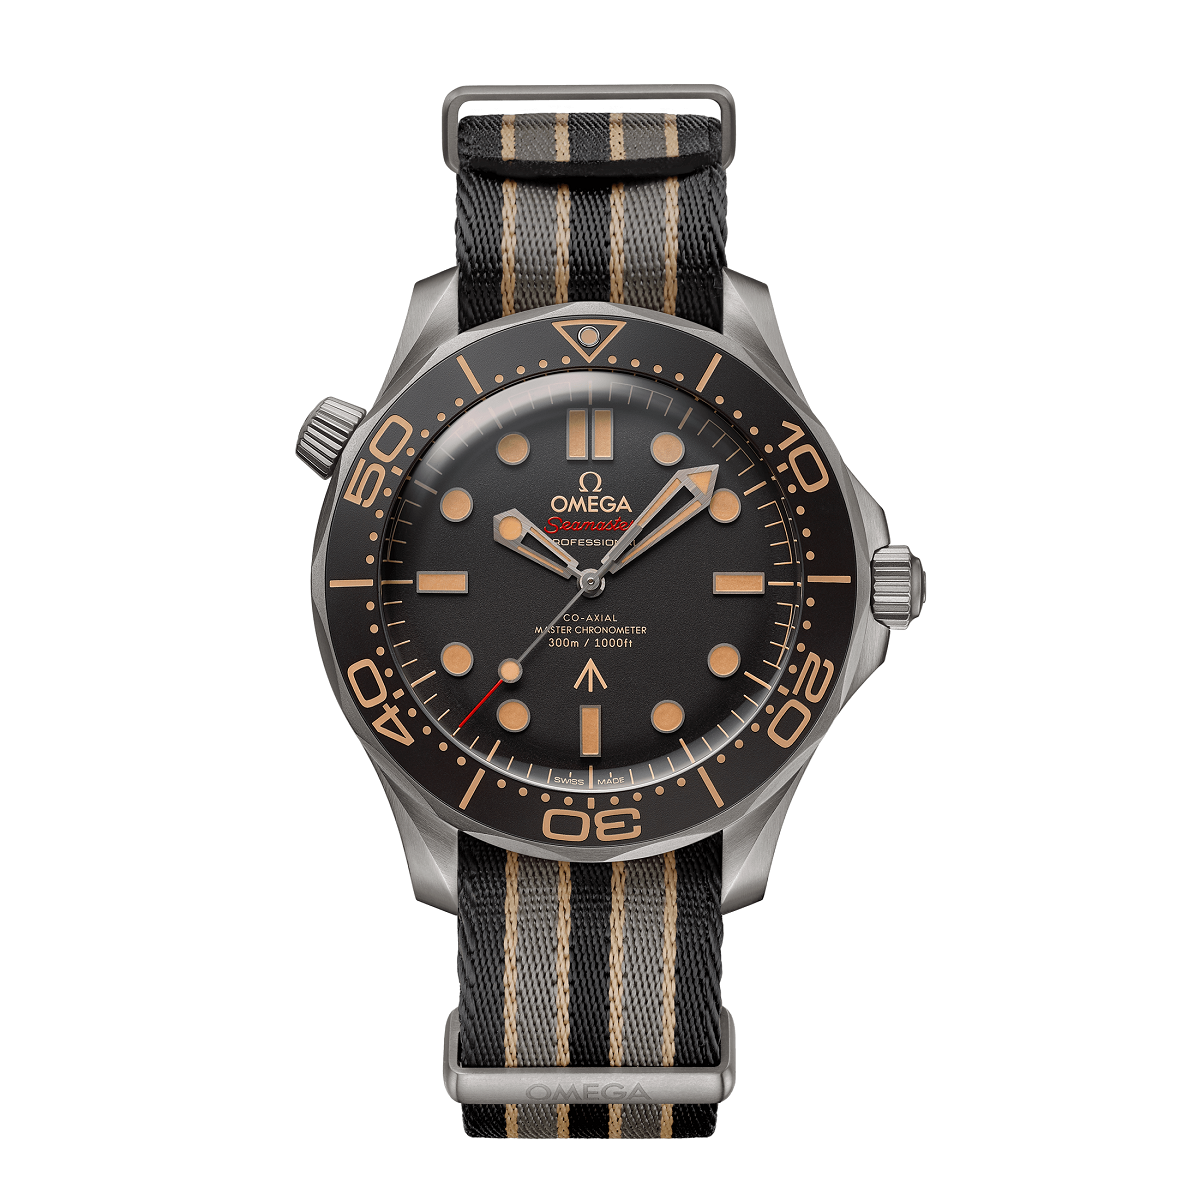 OMEGA SEAMASTER 007 EDITION CO-AXIAL DIVER 300M MASTER CHRONOMETER 42 MM - 210.92.42.20.01.001